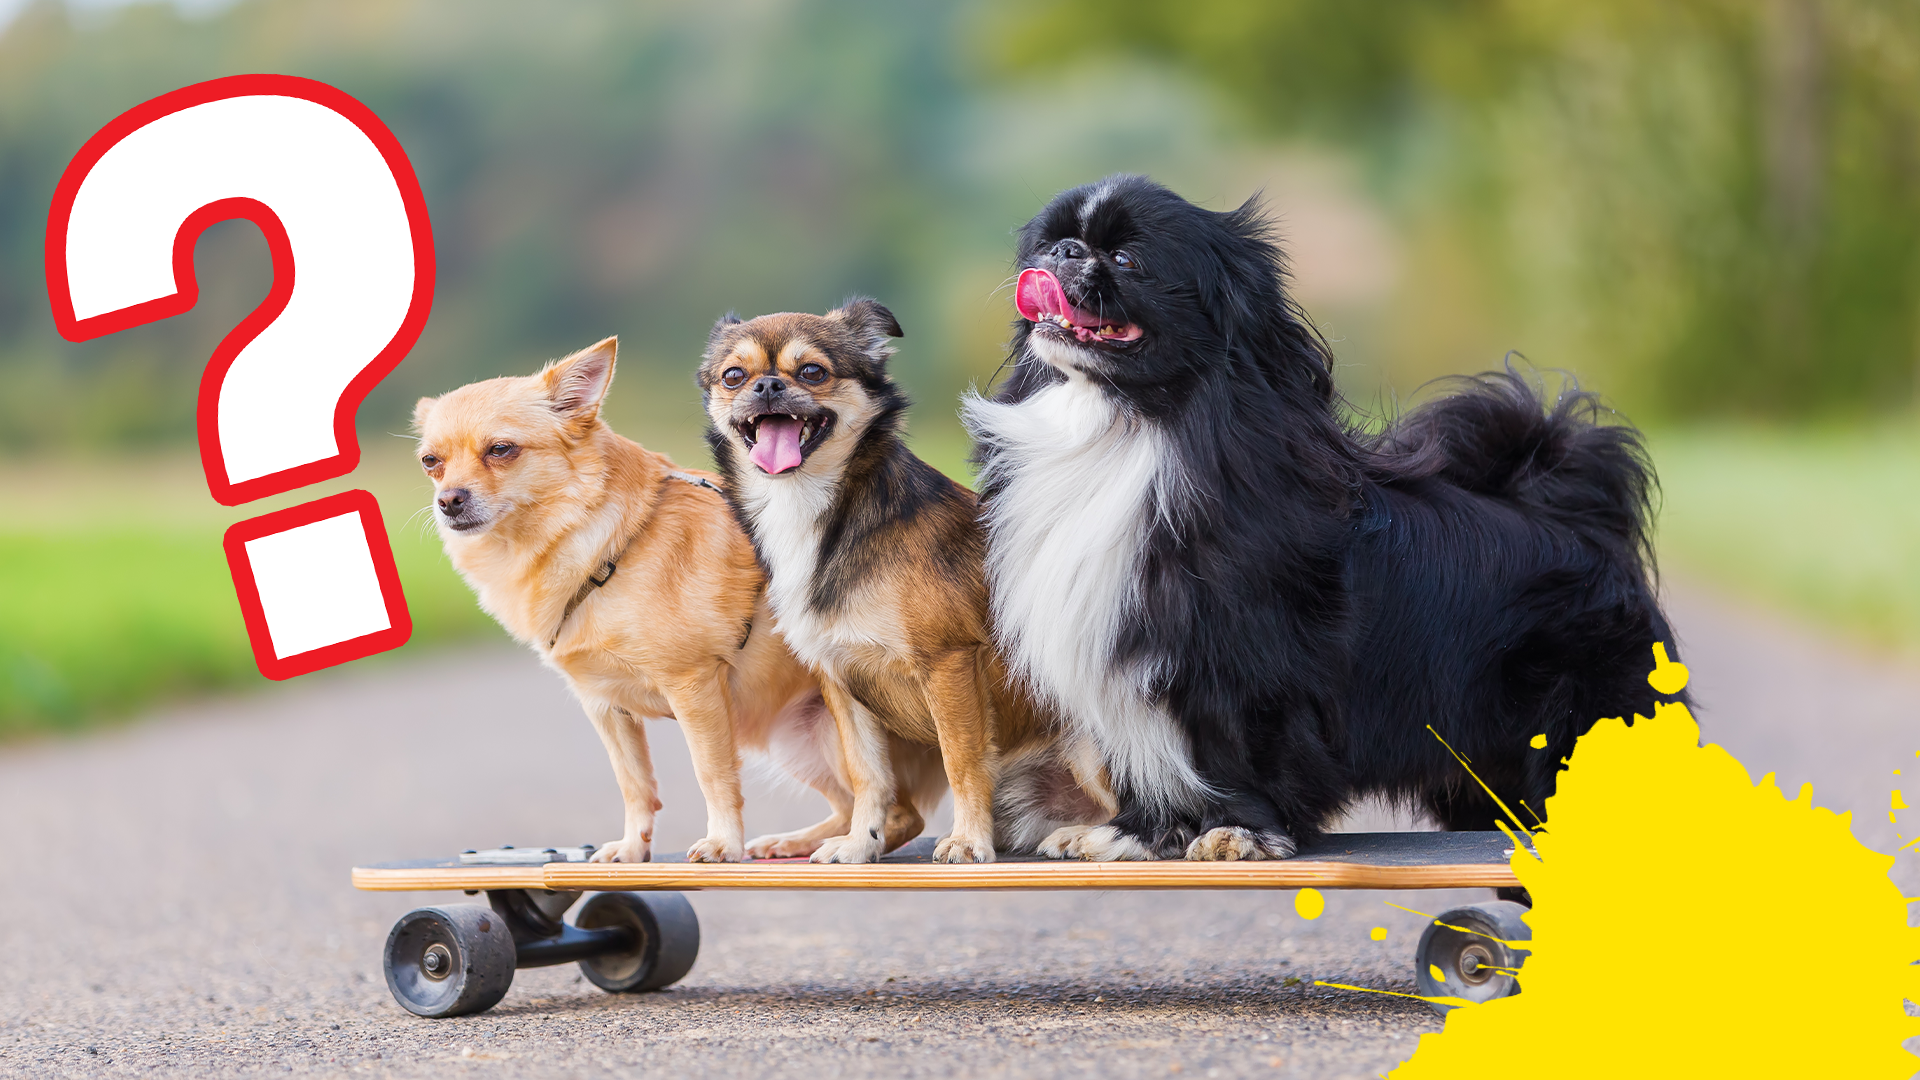 Three dogs on skateboard with question mark and splat 